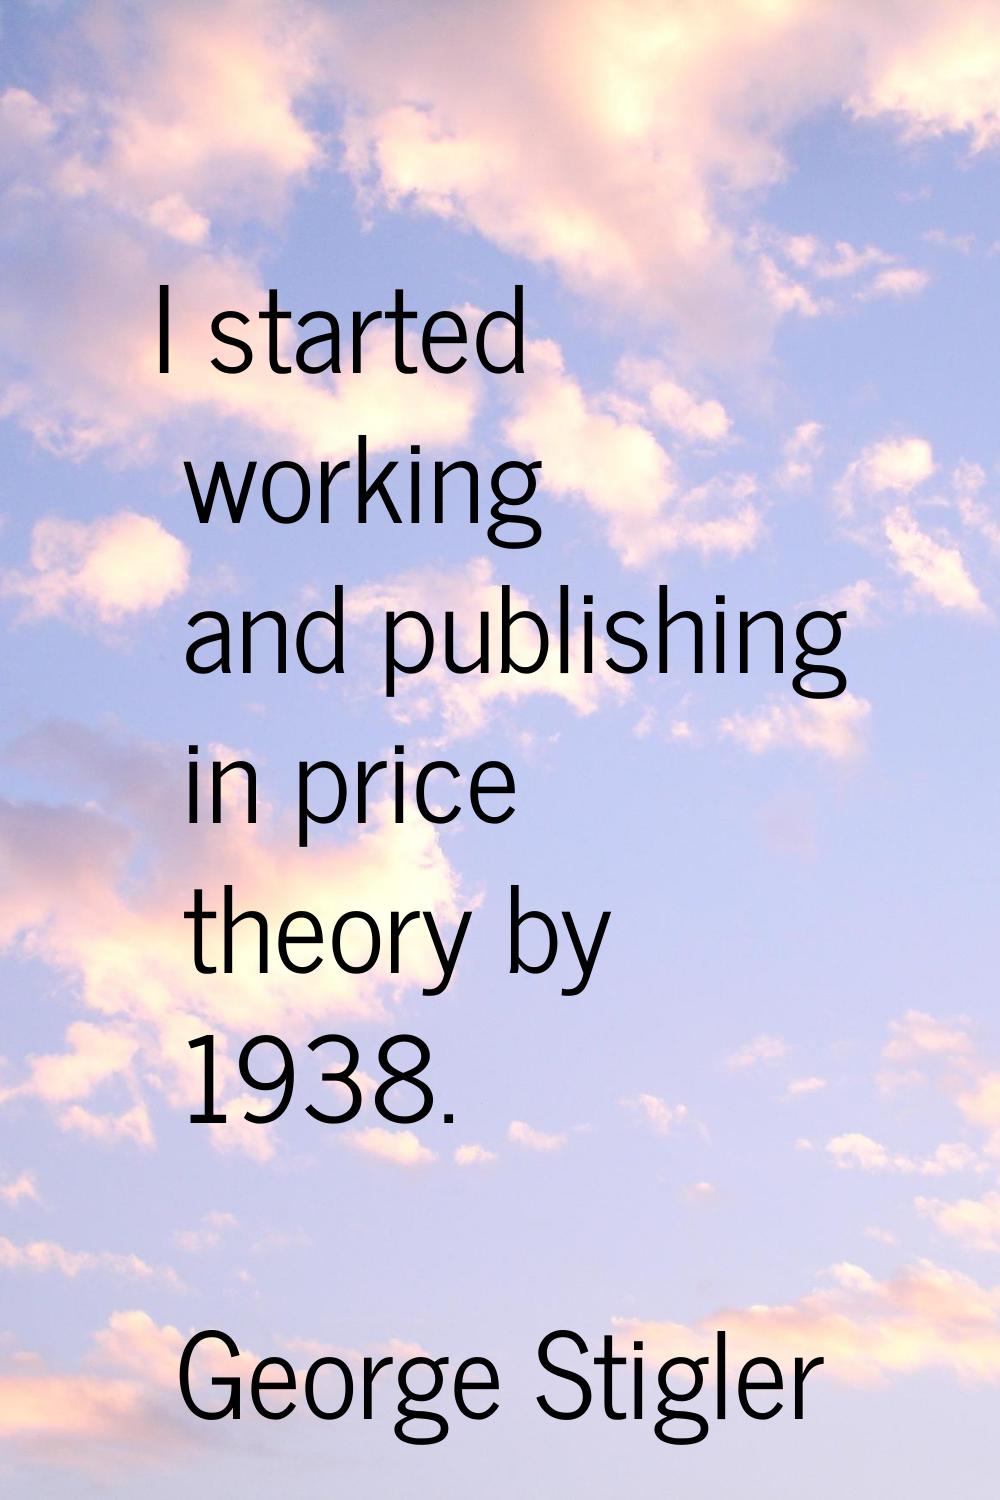 I started working and publishing in price theory by 1938.